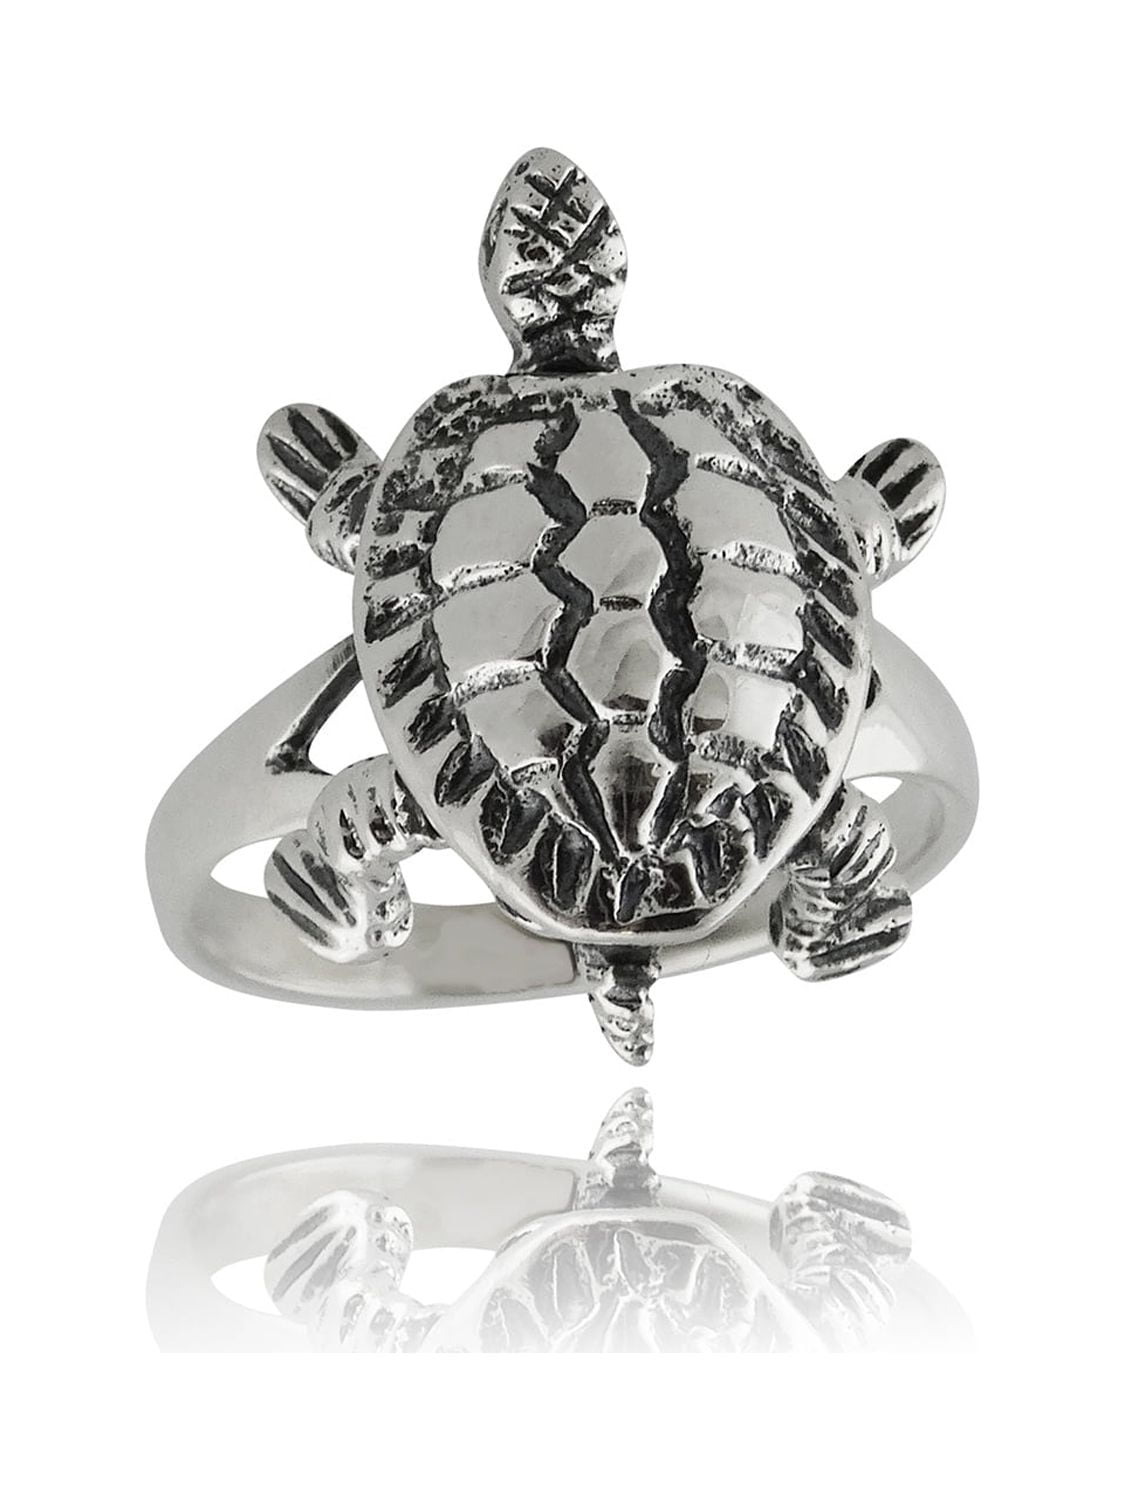 925 Sterling Silver Sea Turtle Ring - Small & Cute Ladies' Jewelry | eBay